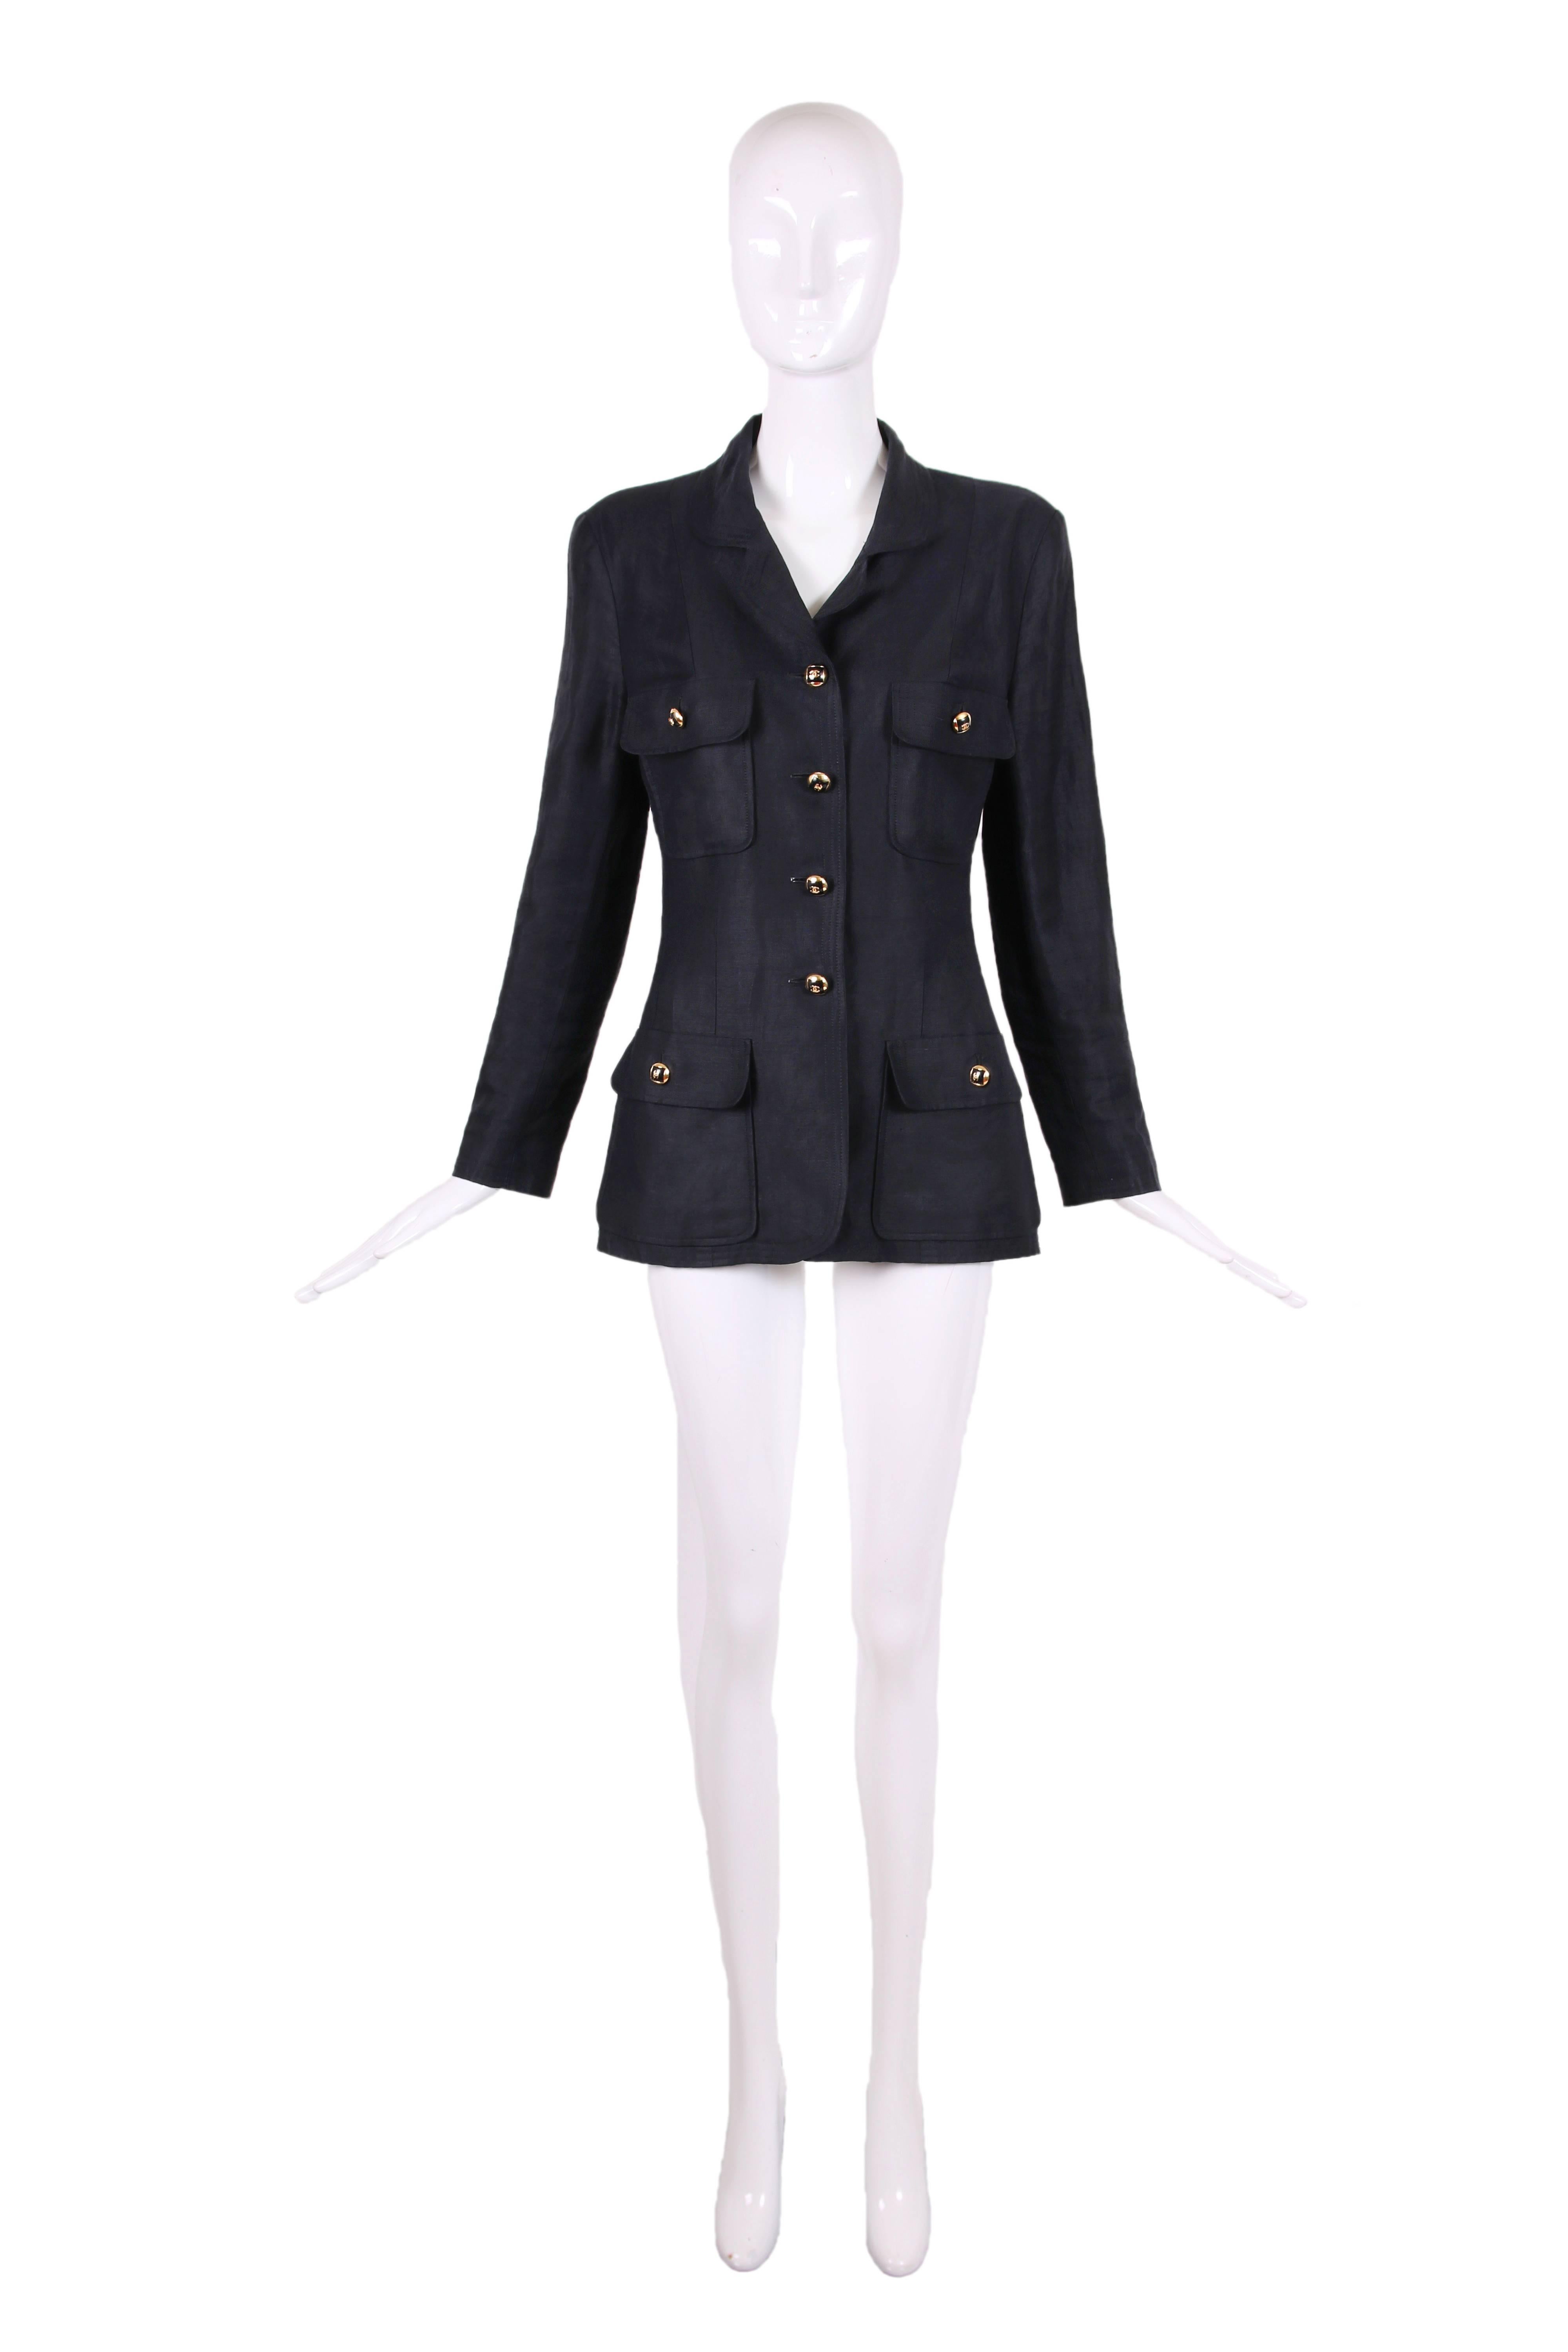 1986 Chanel black linen jacket w/four frontal flap pockets and 14 gold tone domed CC logo buttons w/black square insert in the center - 3 at each cuff, down center front and at the four pockets. No size tag so please consult measurements. Jacket is